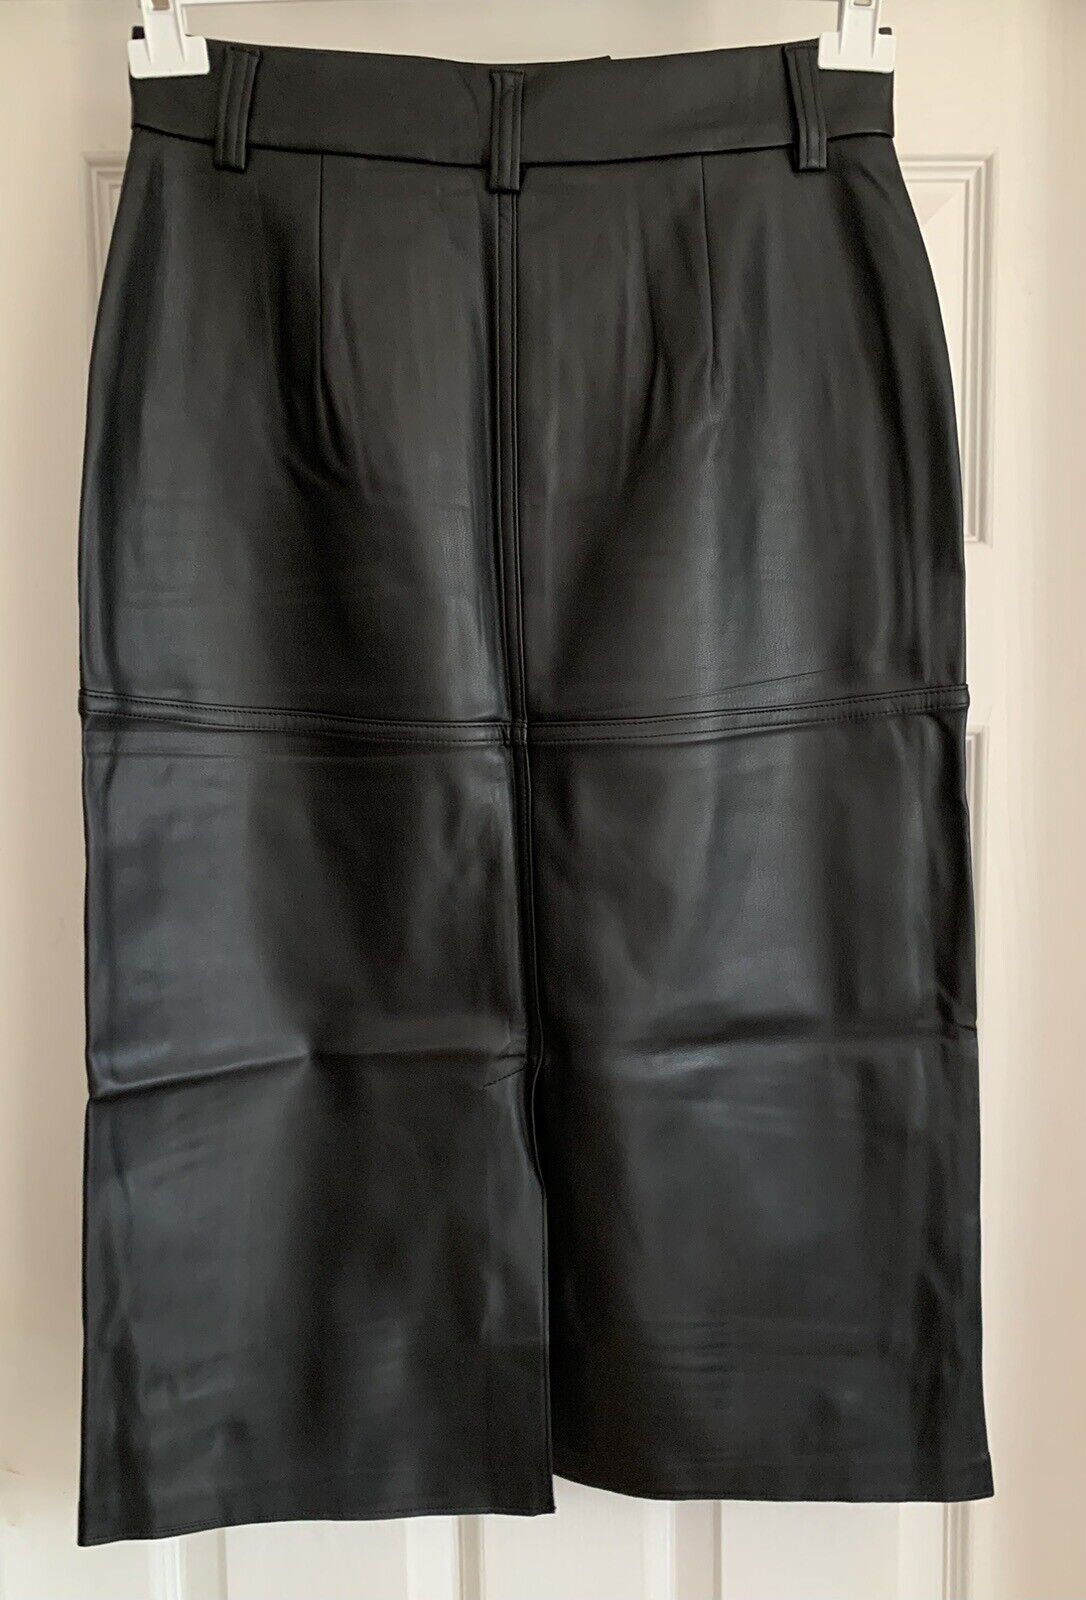 EX M*S Black Unlined Faux Leather A-Line Skirt Sizes 8 10 12 14 16 18 20 RRP £35